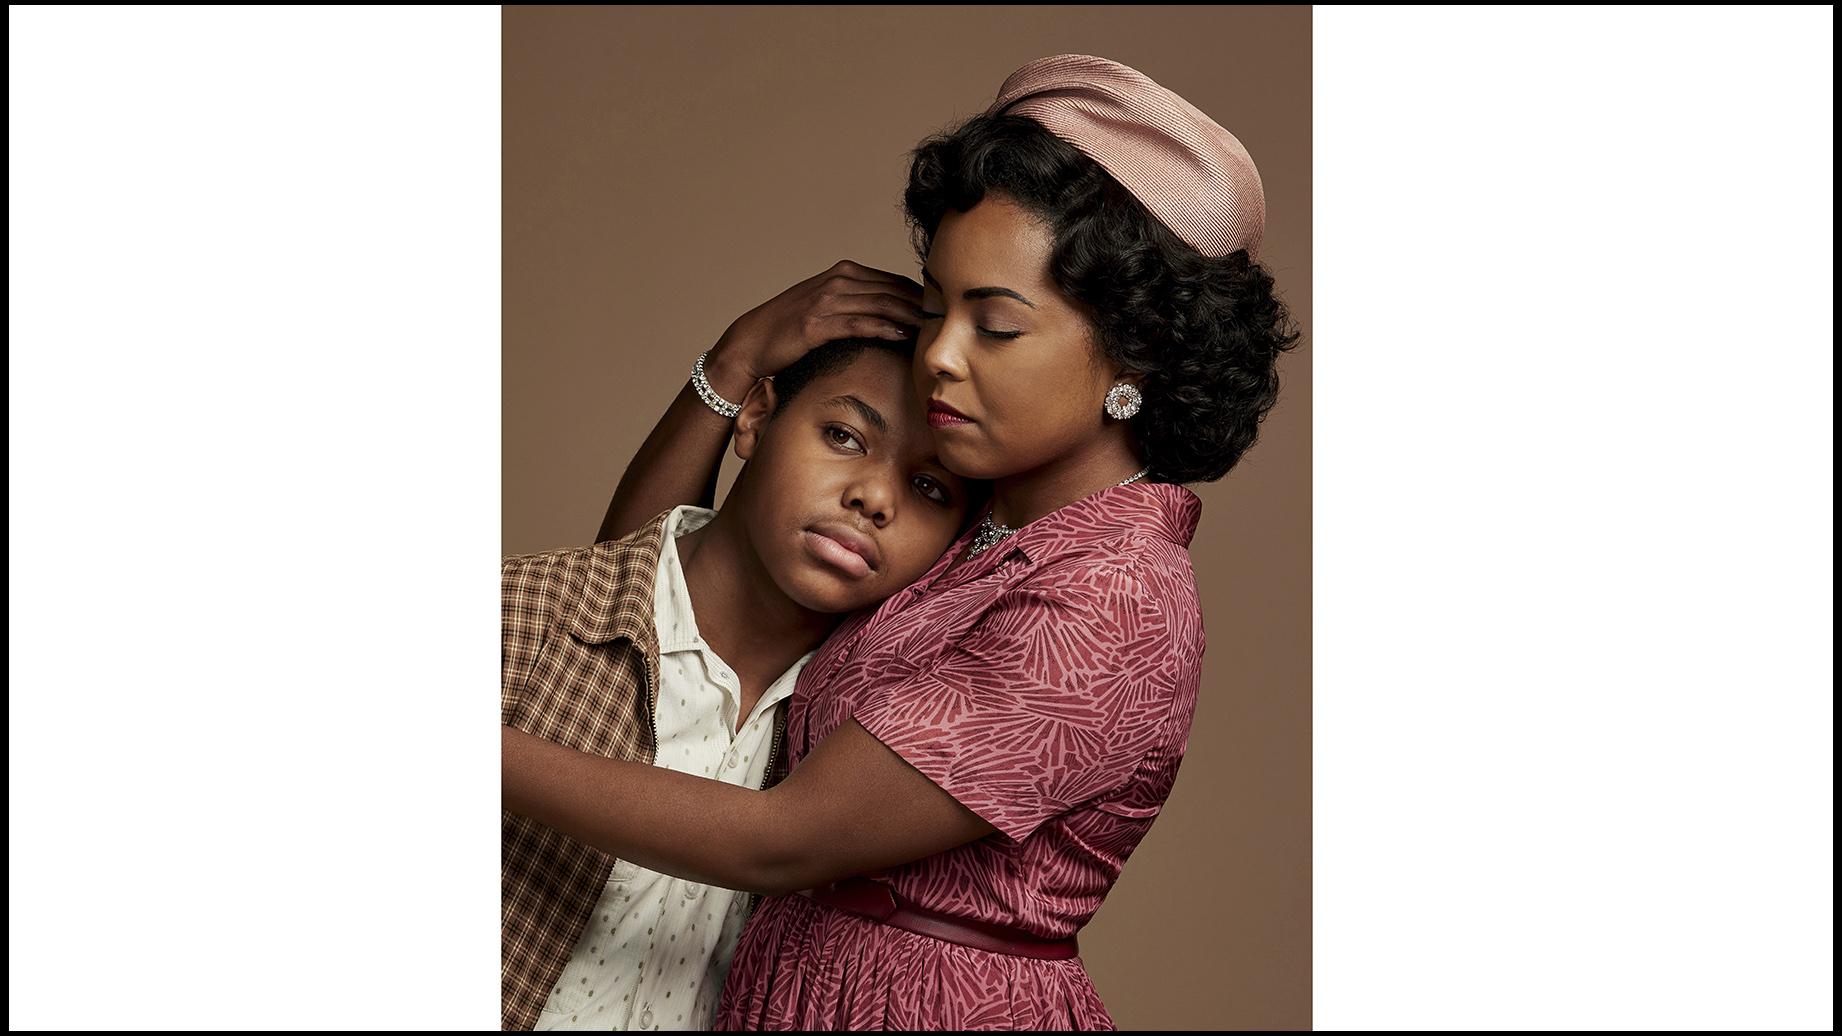 This image released by ABC shows Cedric Joe as Emmett Till, left, and Adrienne Warren as Mamie Till-Mobley in “Women of the Movement.” (Matt Sayles. ABC via AP)